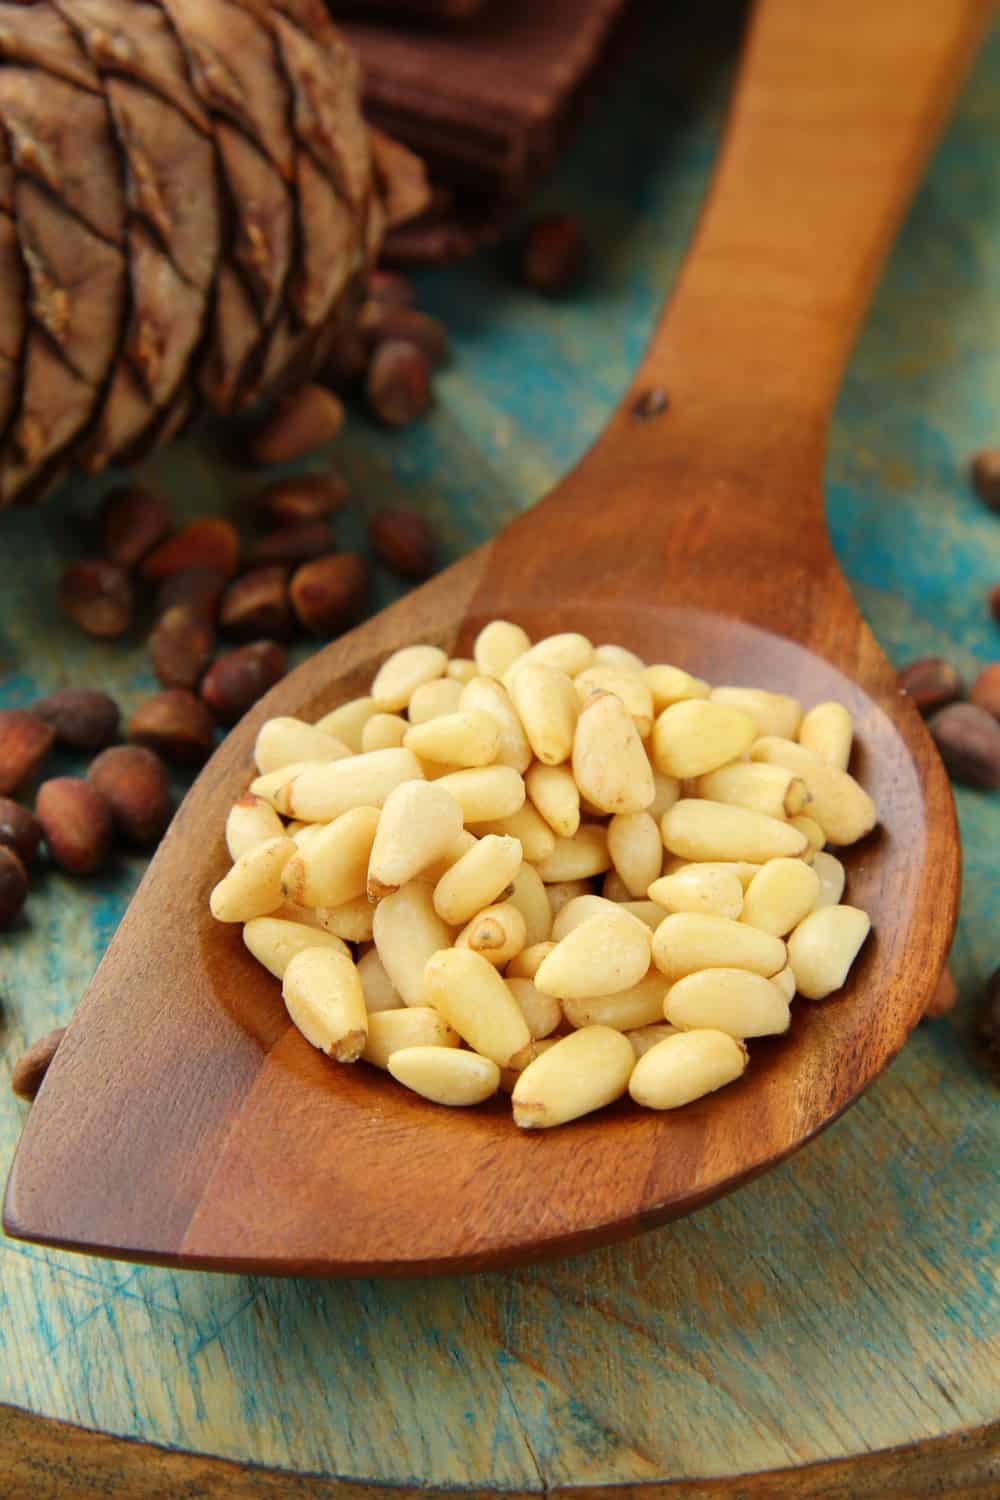 Tips to Tell if Pine Nuts have Gone Bad